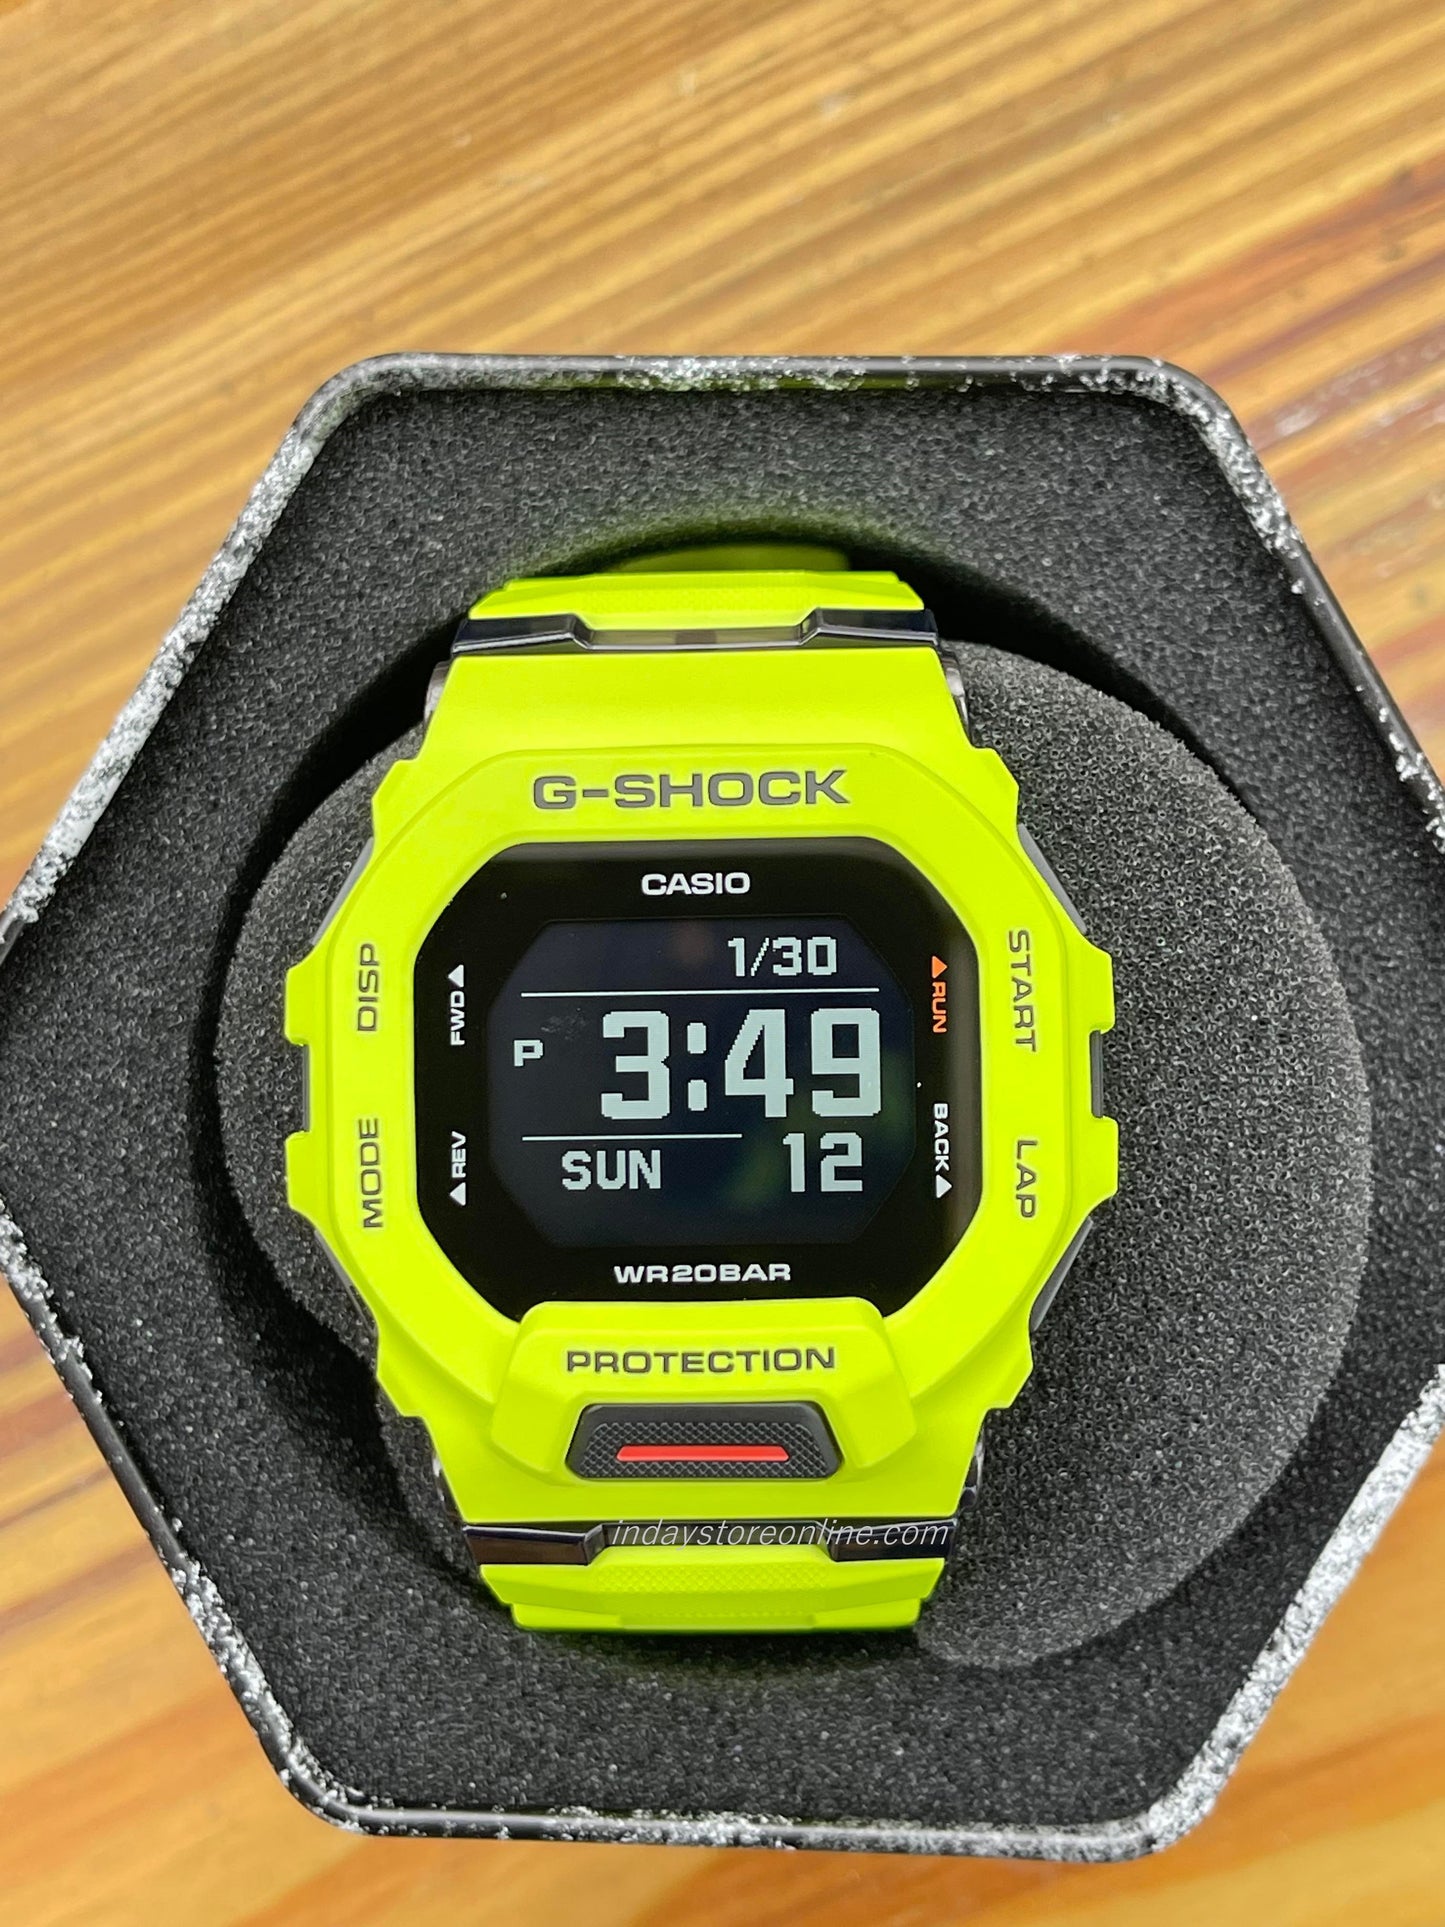 Casio G-Shock Men's Watch GBD-200-9  G-Squad GBD-200 Series Shock Resistant Mobile link (Automatic connection, wireless linking using Bluetooth®)